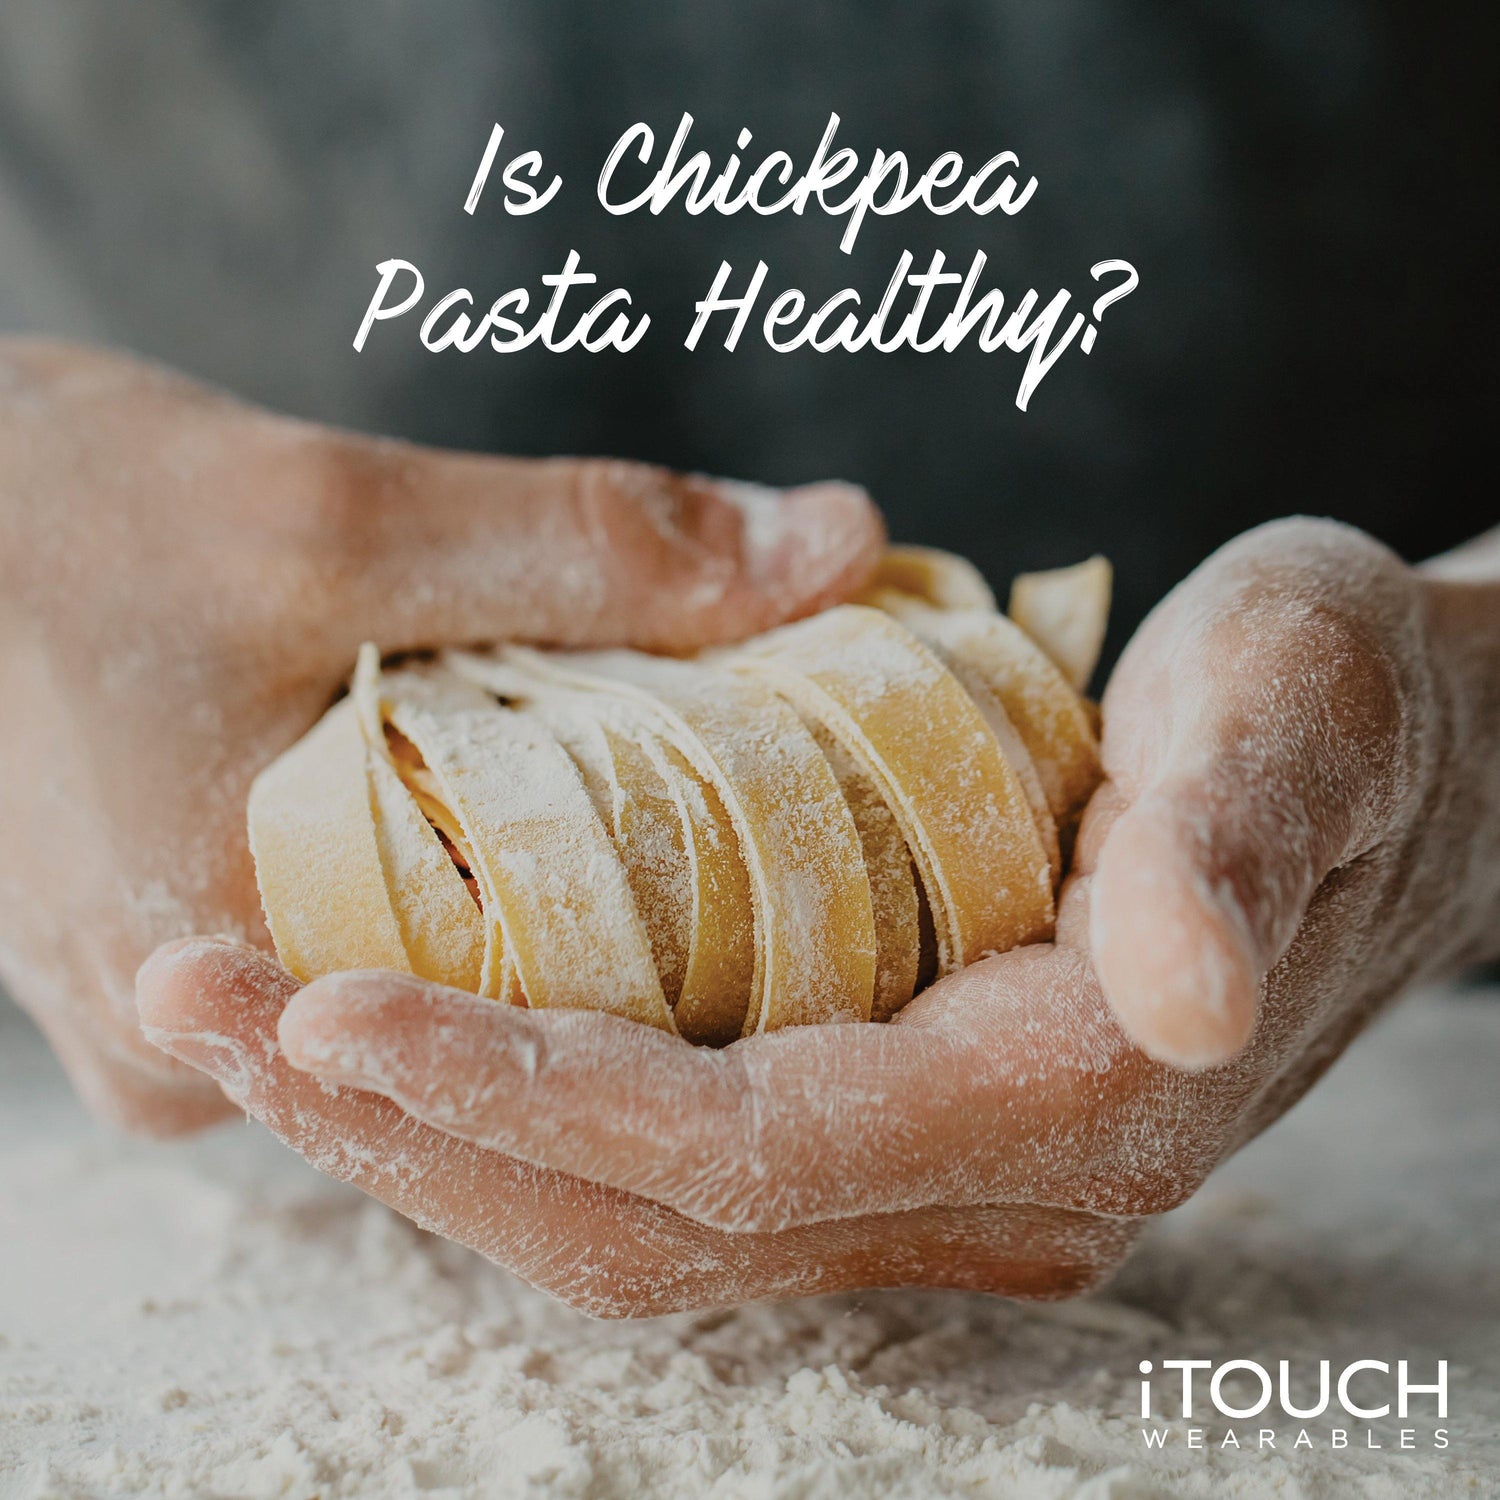 Is Chickpea Pasta Healthy? - iTOUCH Wearables